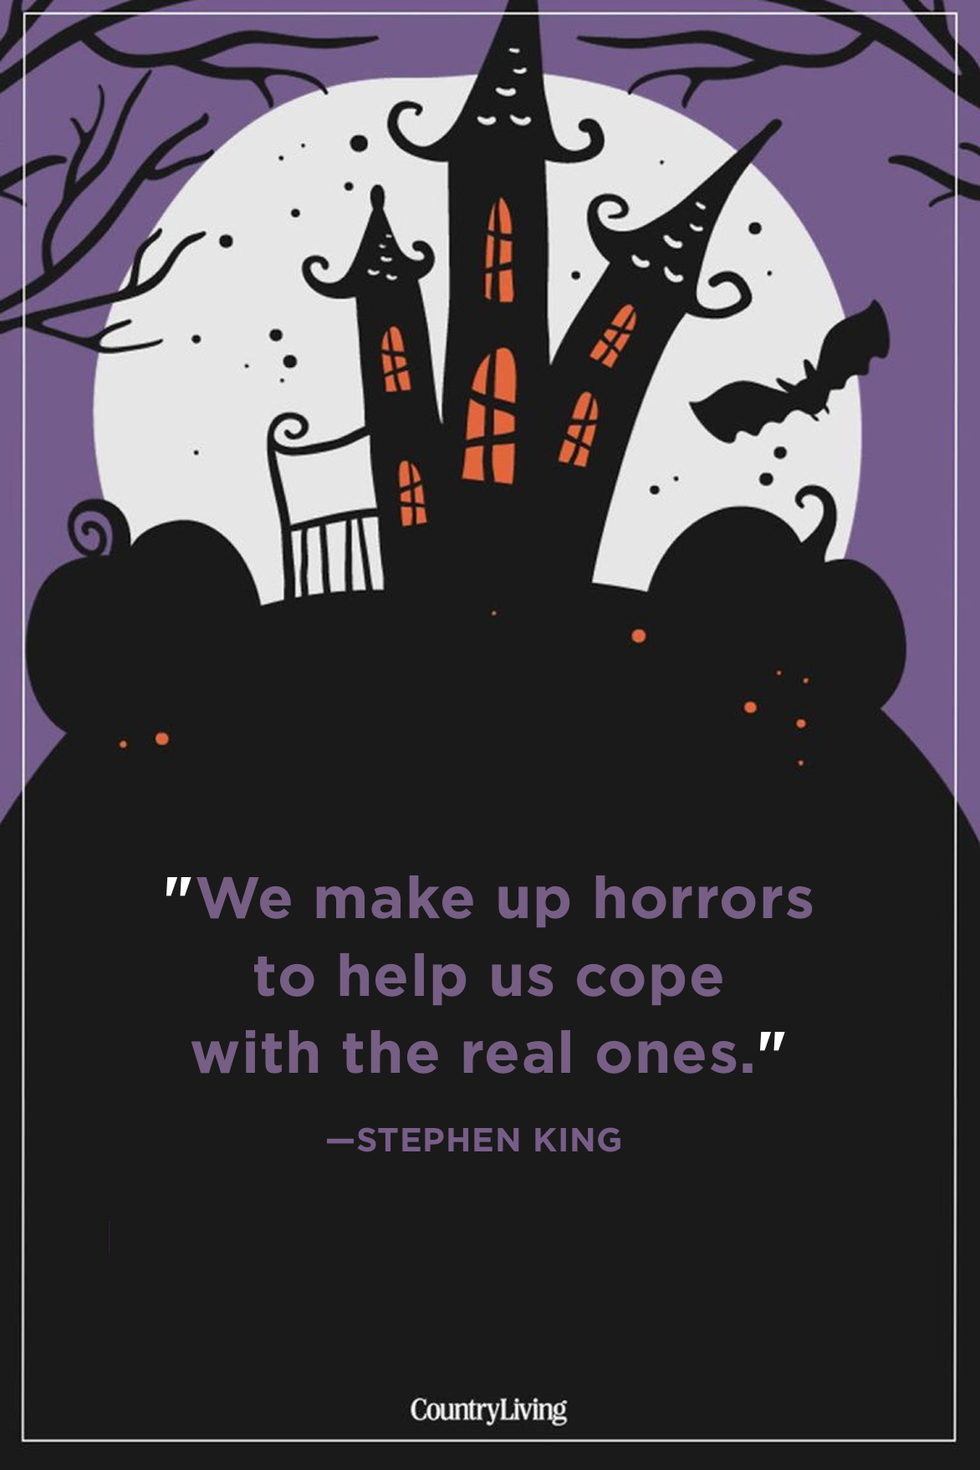 43 Best Famous Halloween Quotes, Sayings, and Phrases